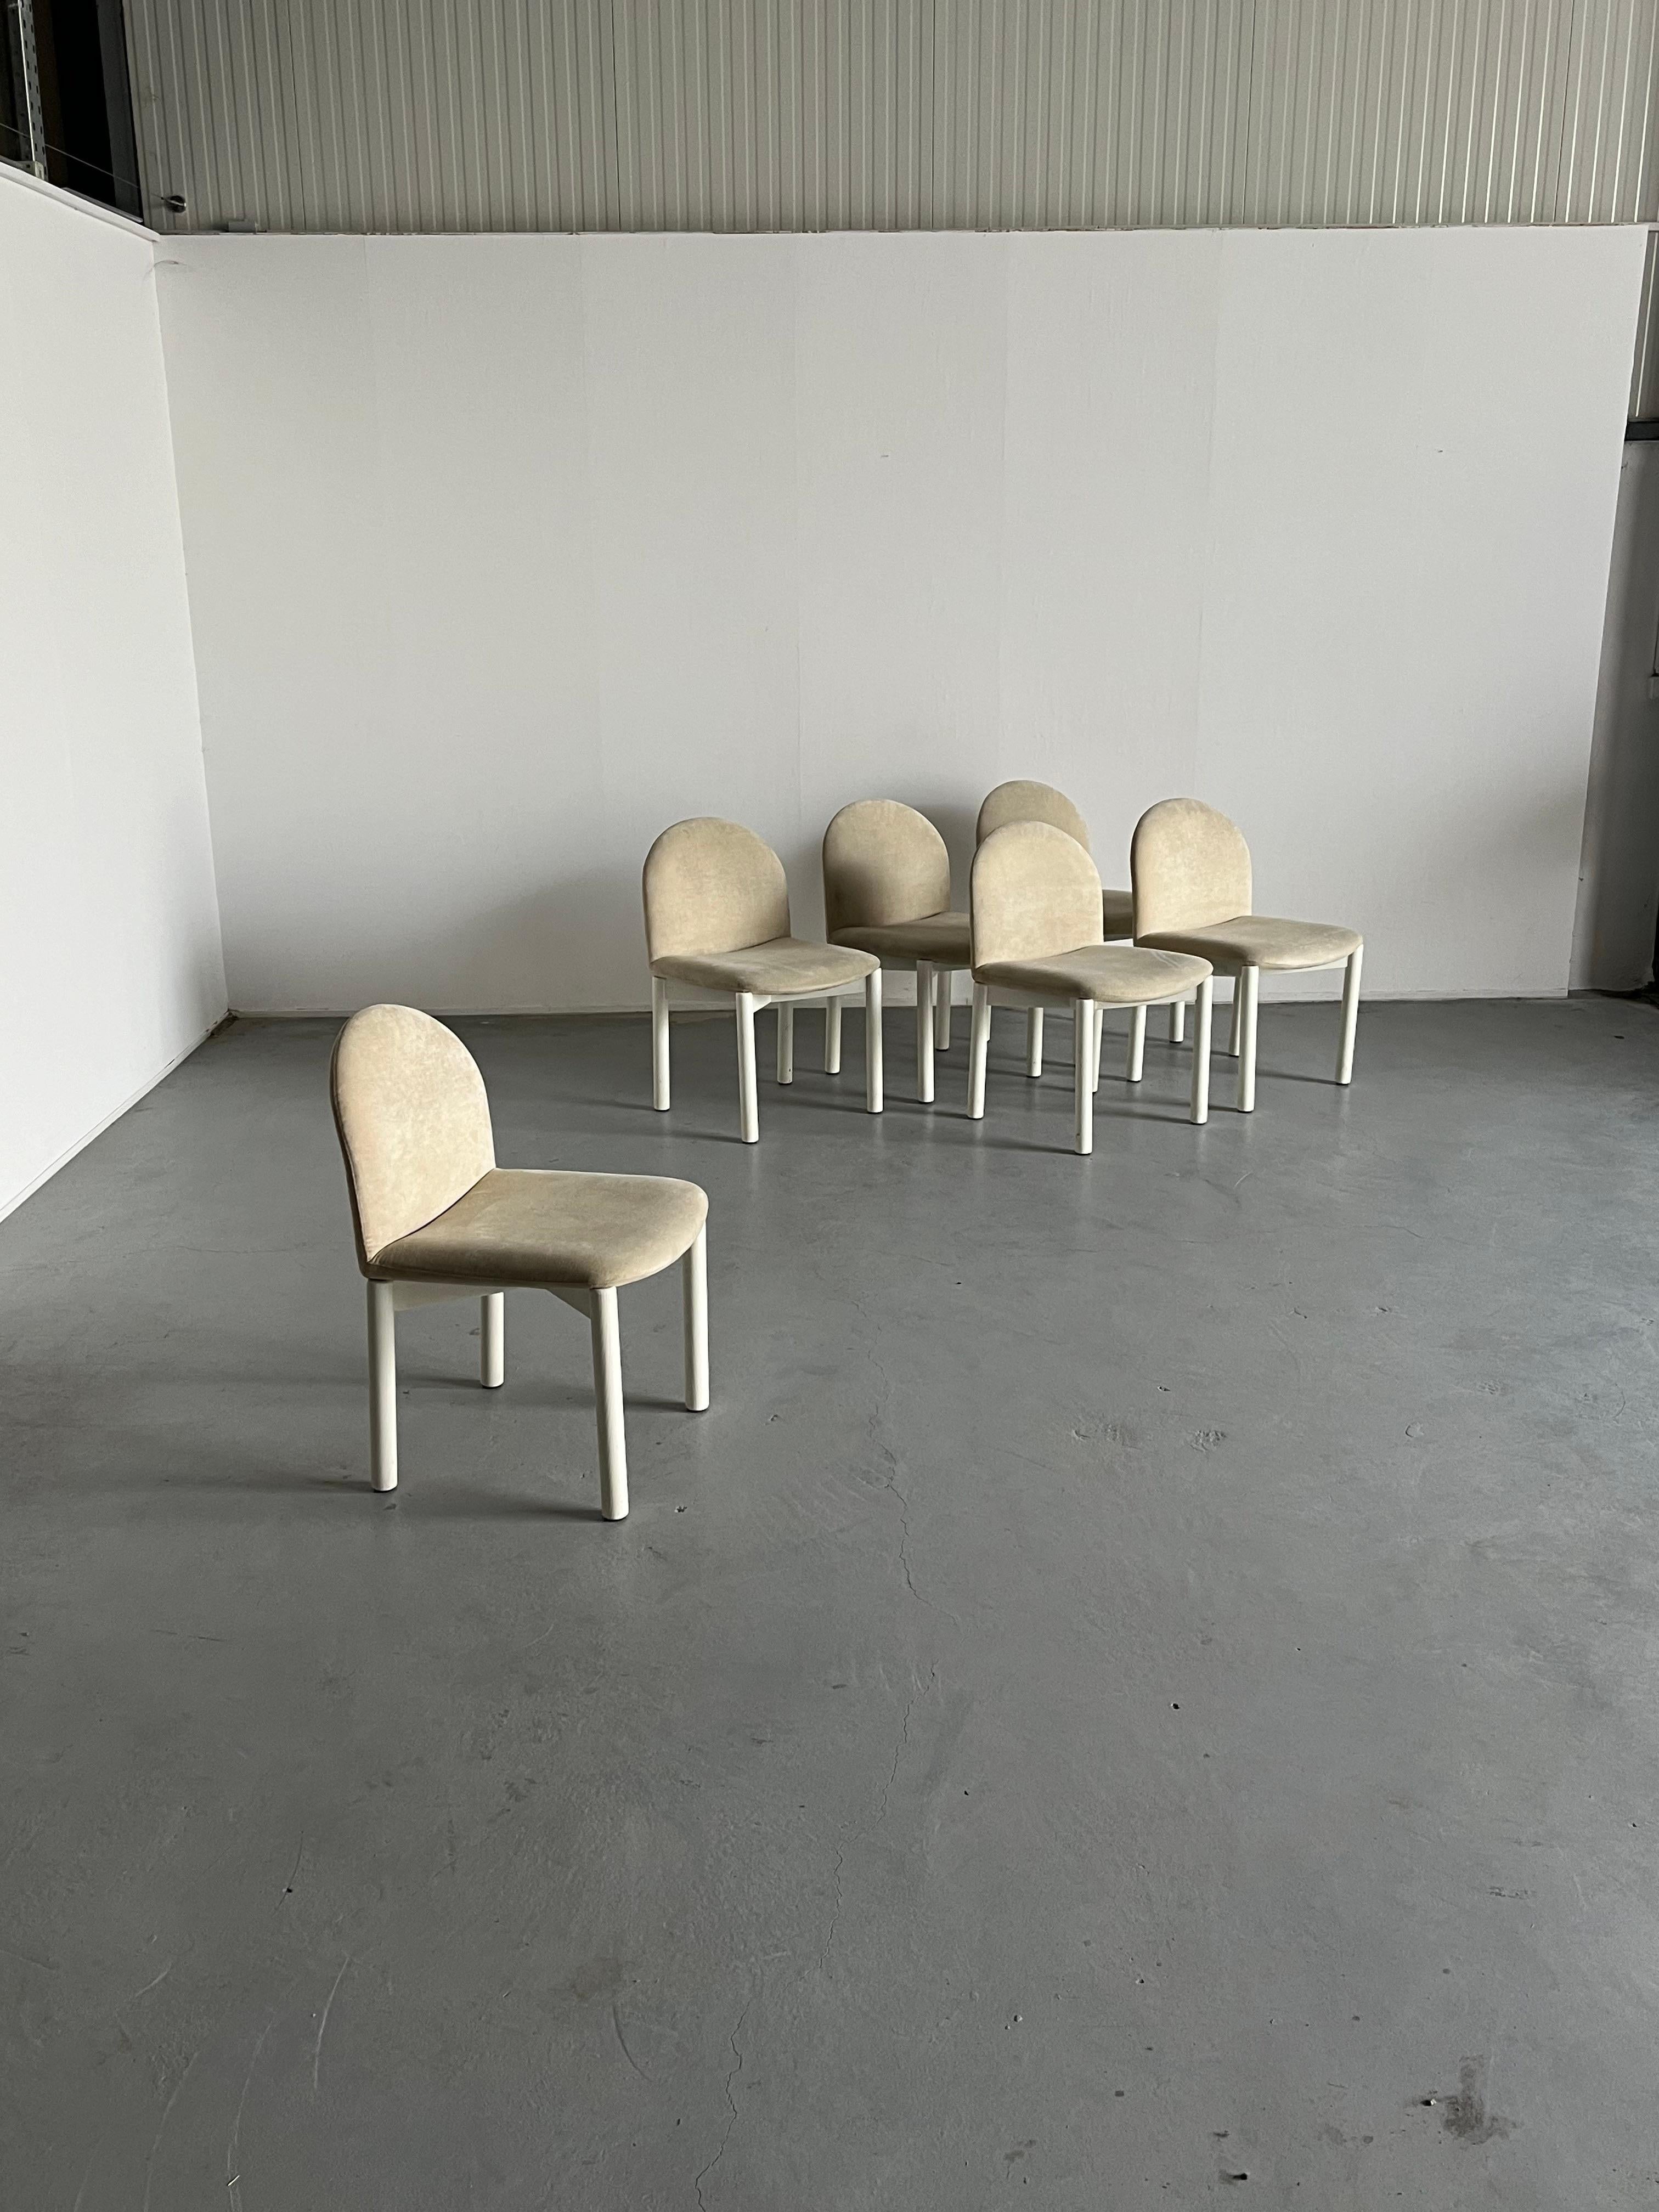 Set of six Mid-century modern 'Combra' chairs, produced by the iconic German furniture manufacturer COR, well known for their modular sofas and 1970s and 1980s designs.

Off white velvet upholstery and painted wood white base.
Simple, elegant,